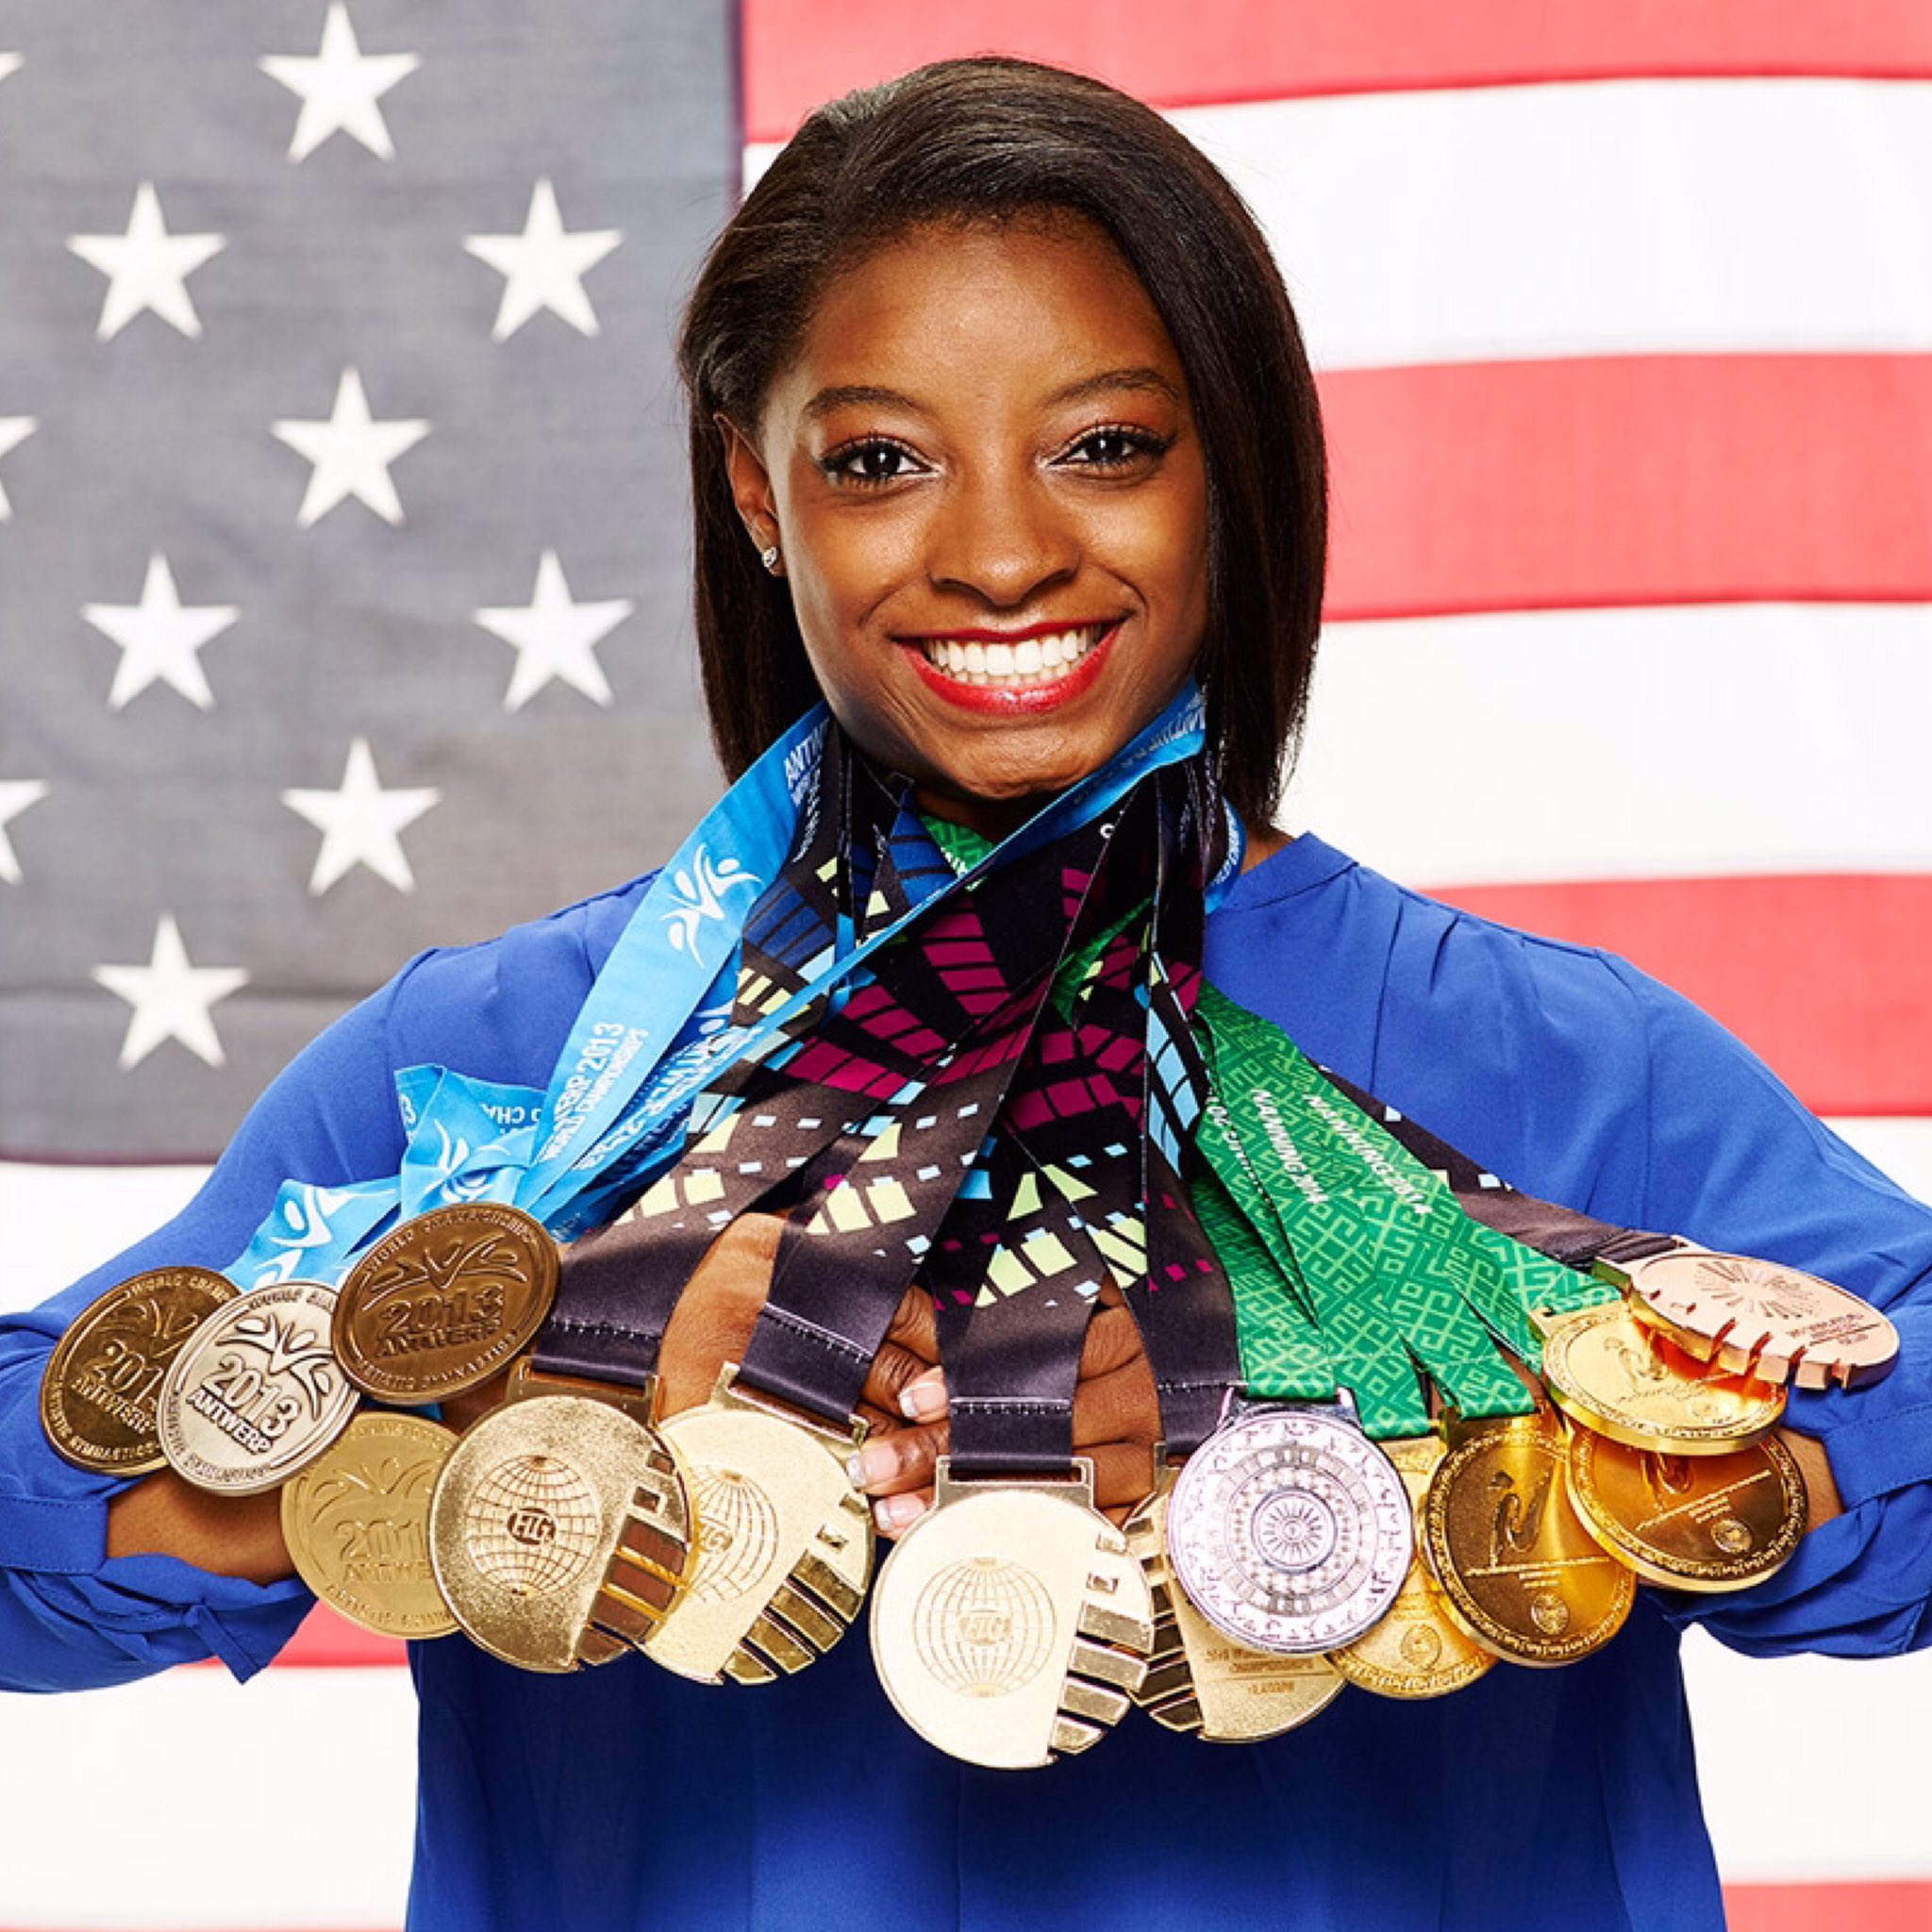 Happy 20th birthday to our Gold Medalist/world Olympic champion 